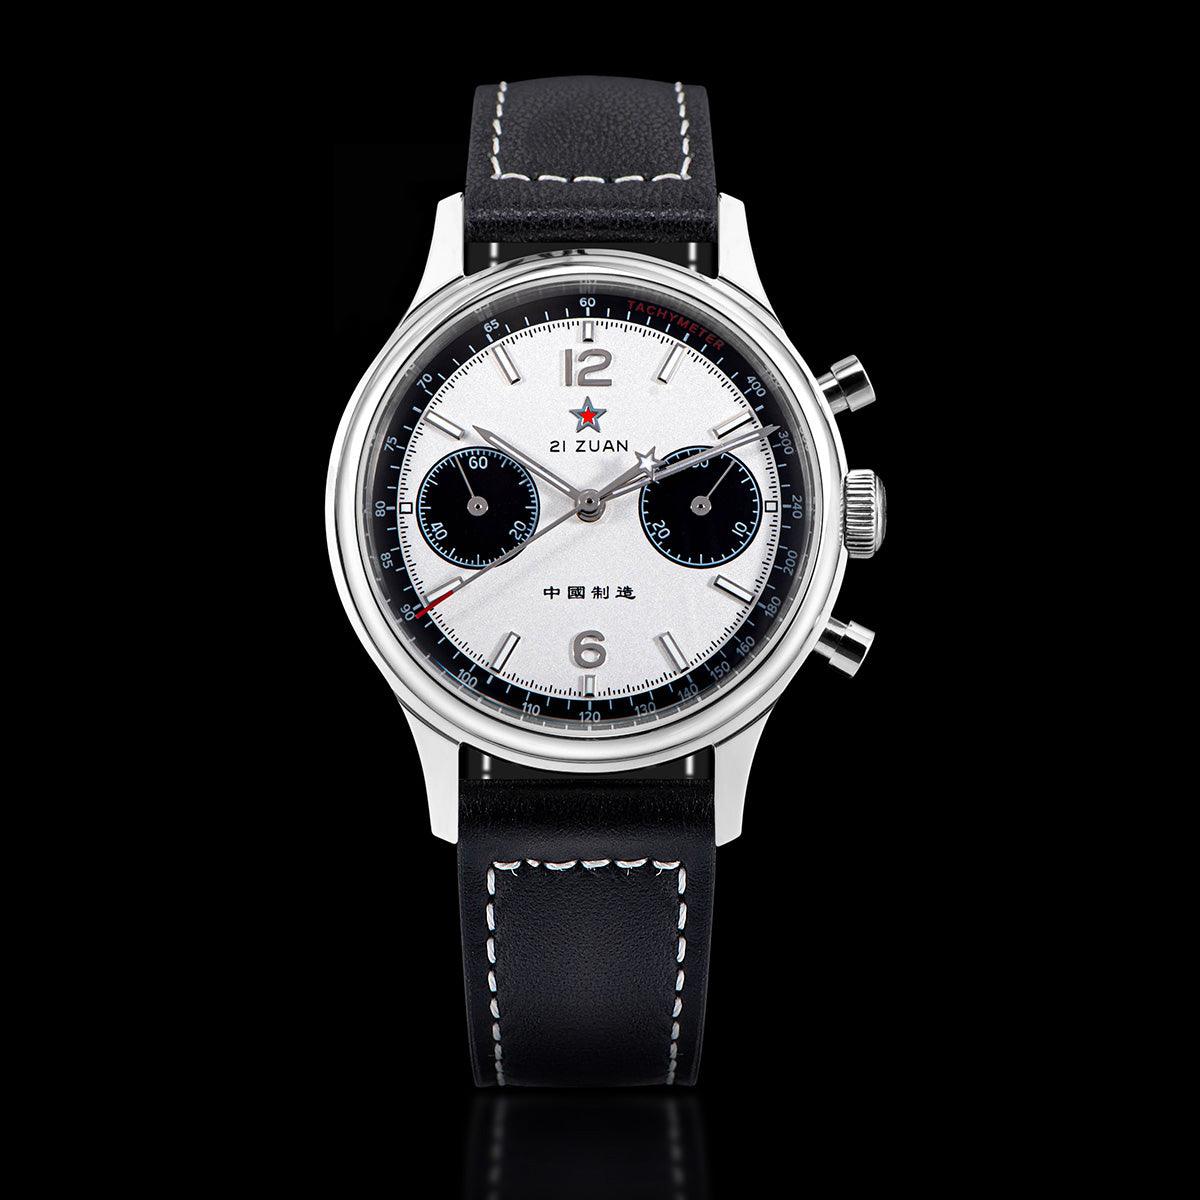 Seagull White Panda Mechanical Men's Watch with 21 Jewels, ST19 Chronograph, and Sapphire Crystal - Model: ST1901-1 - Murphy Johnson Watches Co.